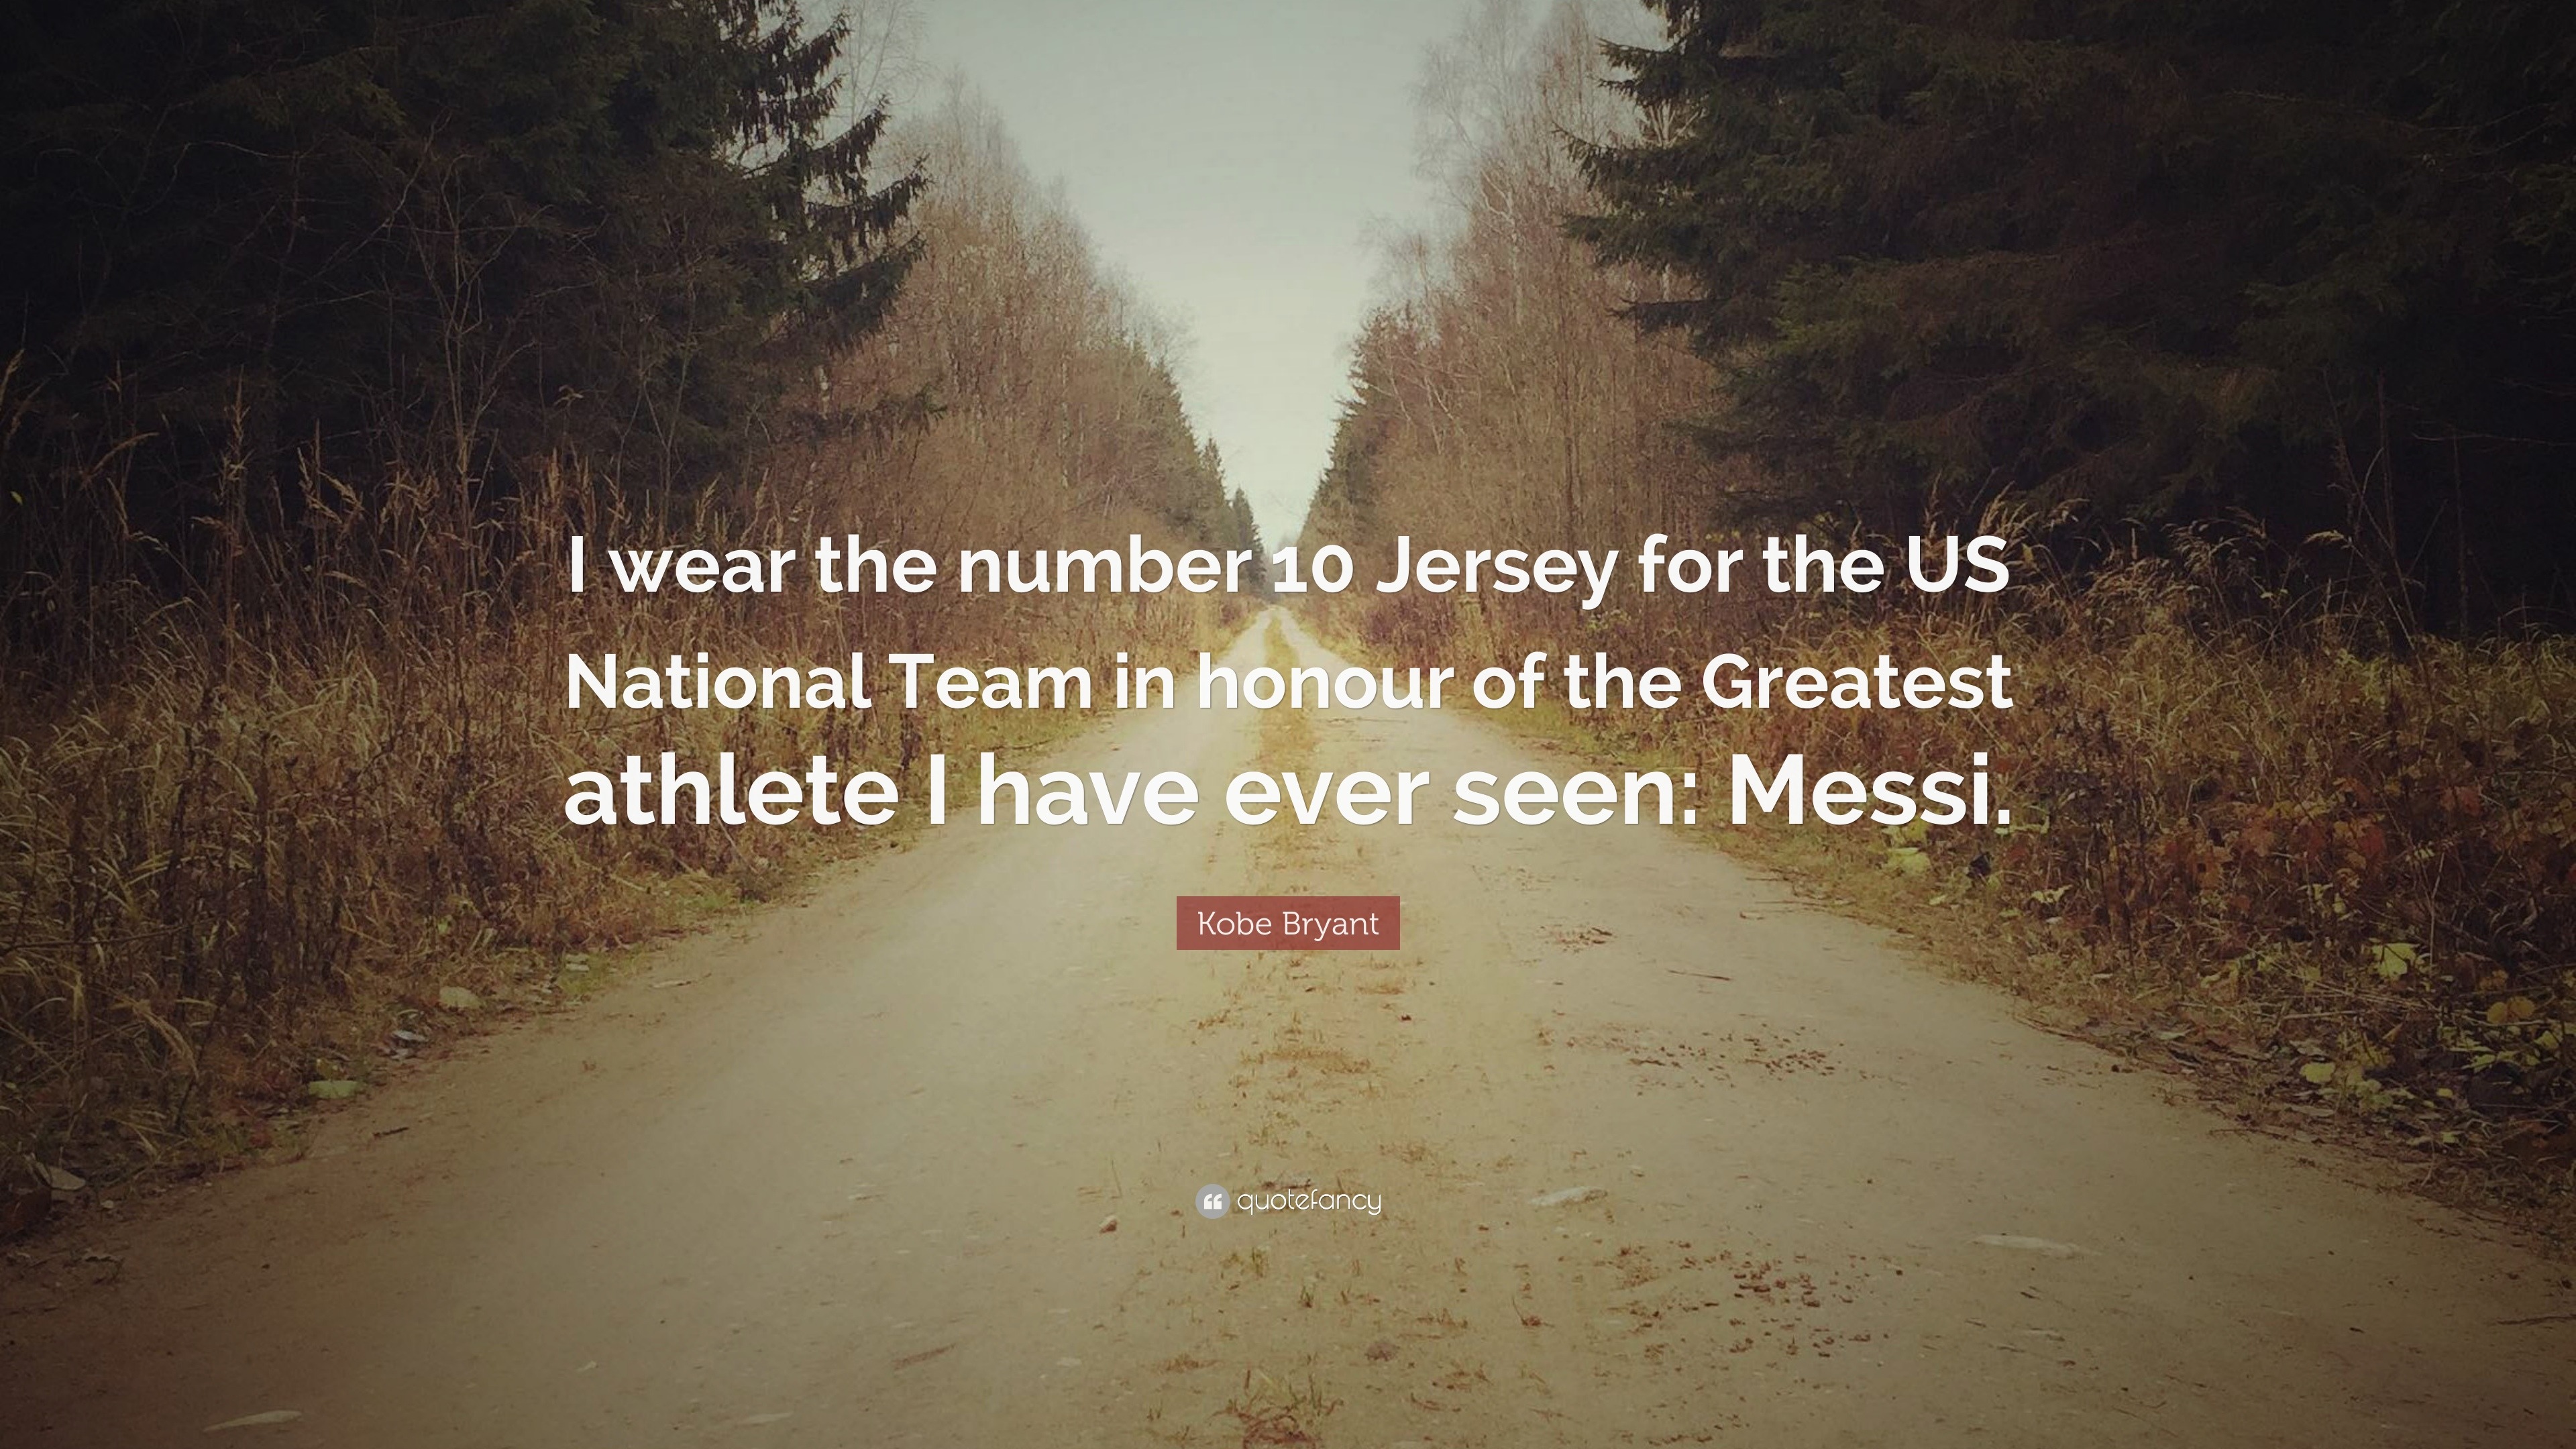 Kobe Bryant Quote: “I wear the number 10 Jersey for the US National Team in  honour